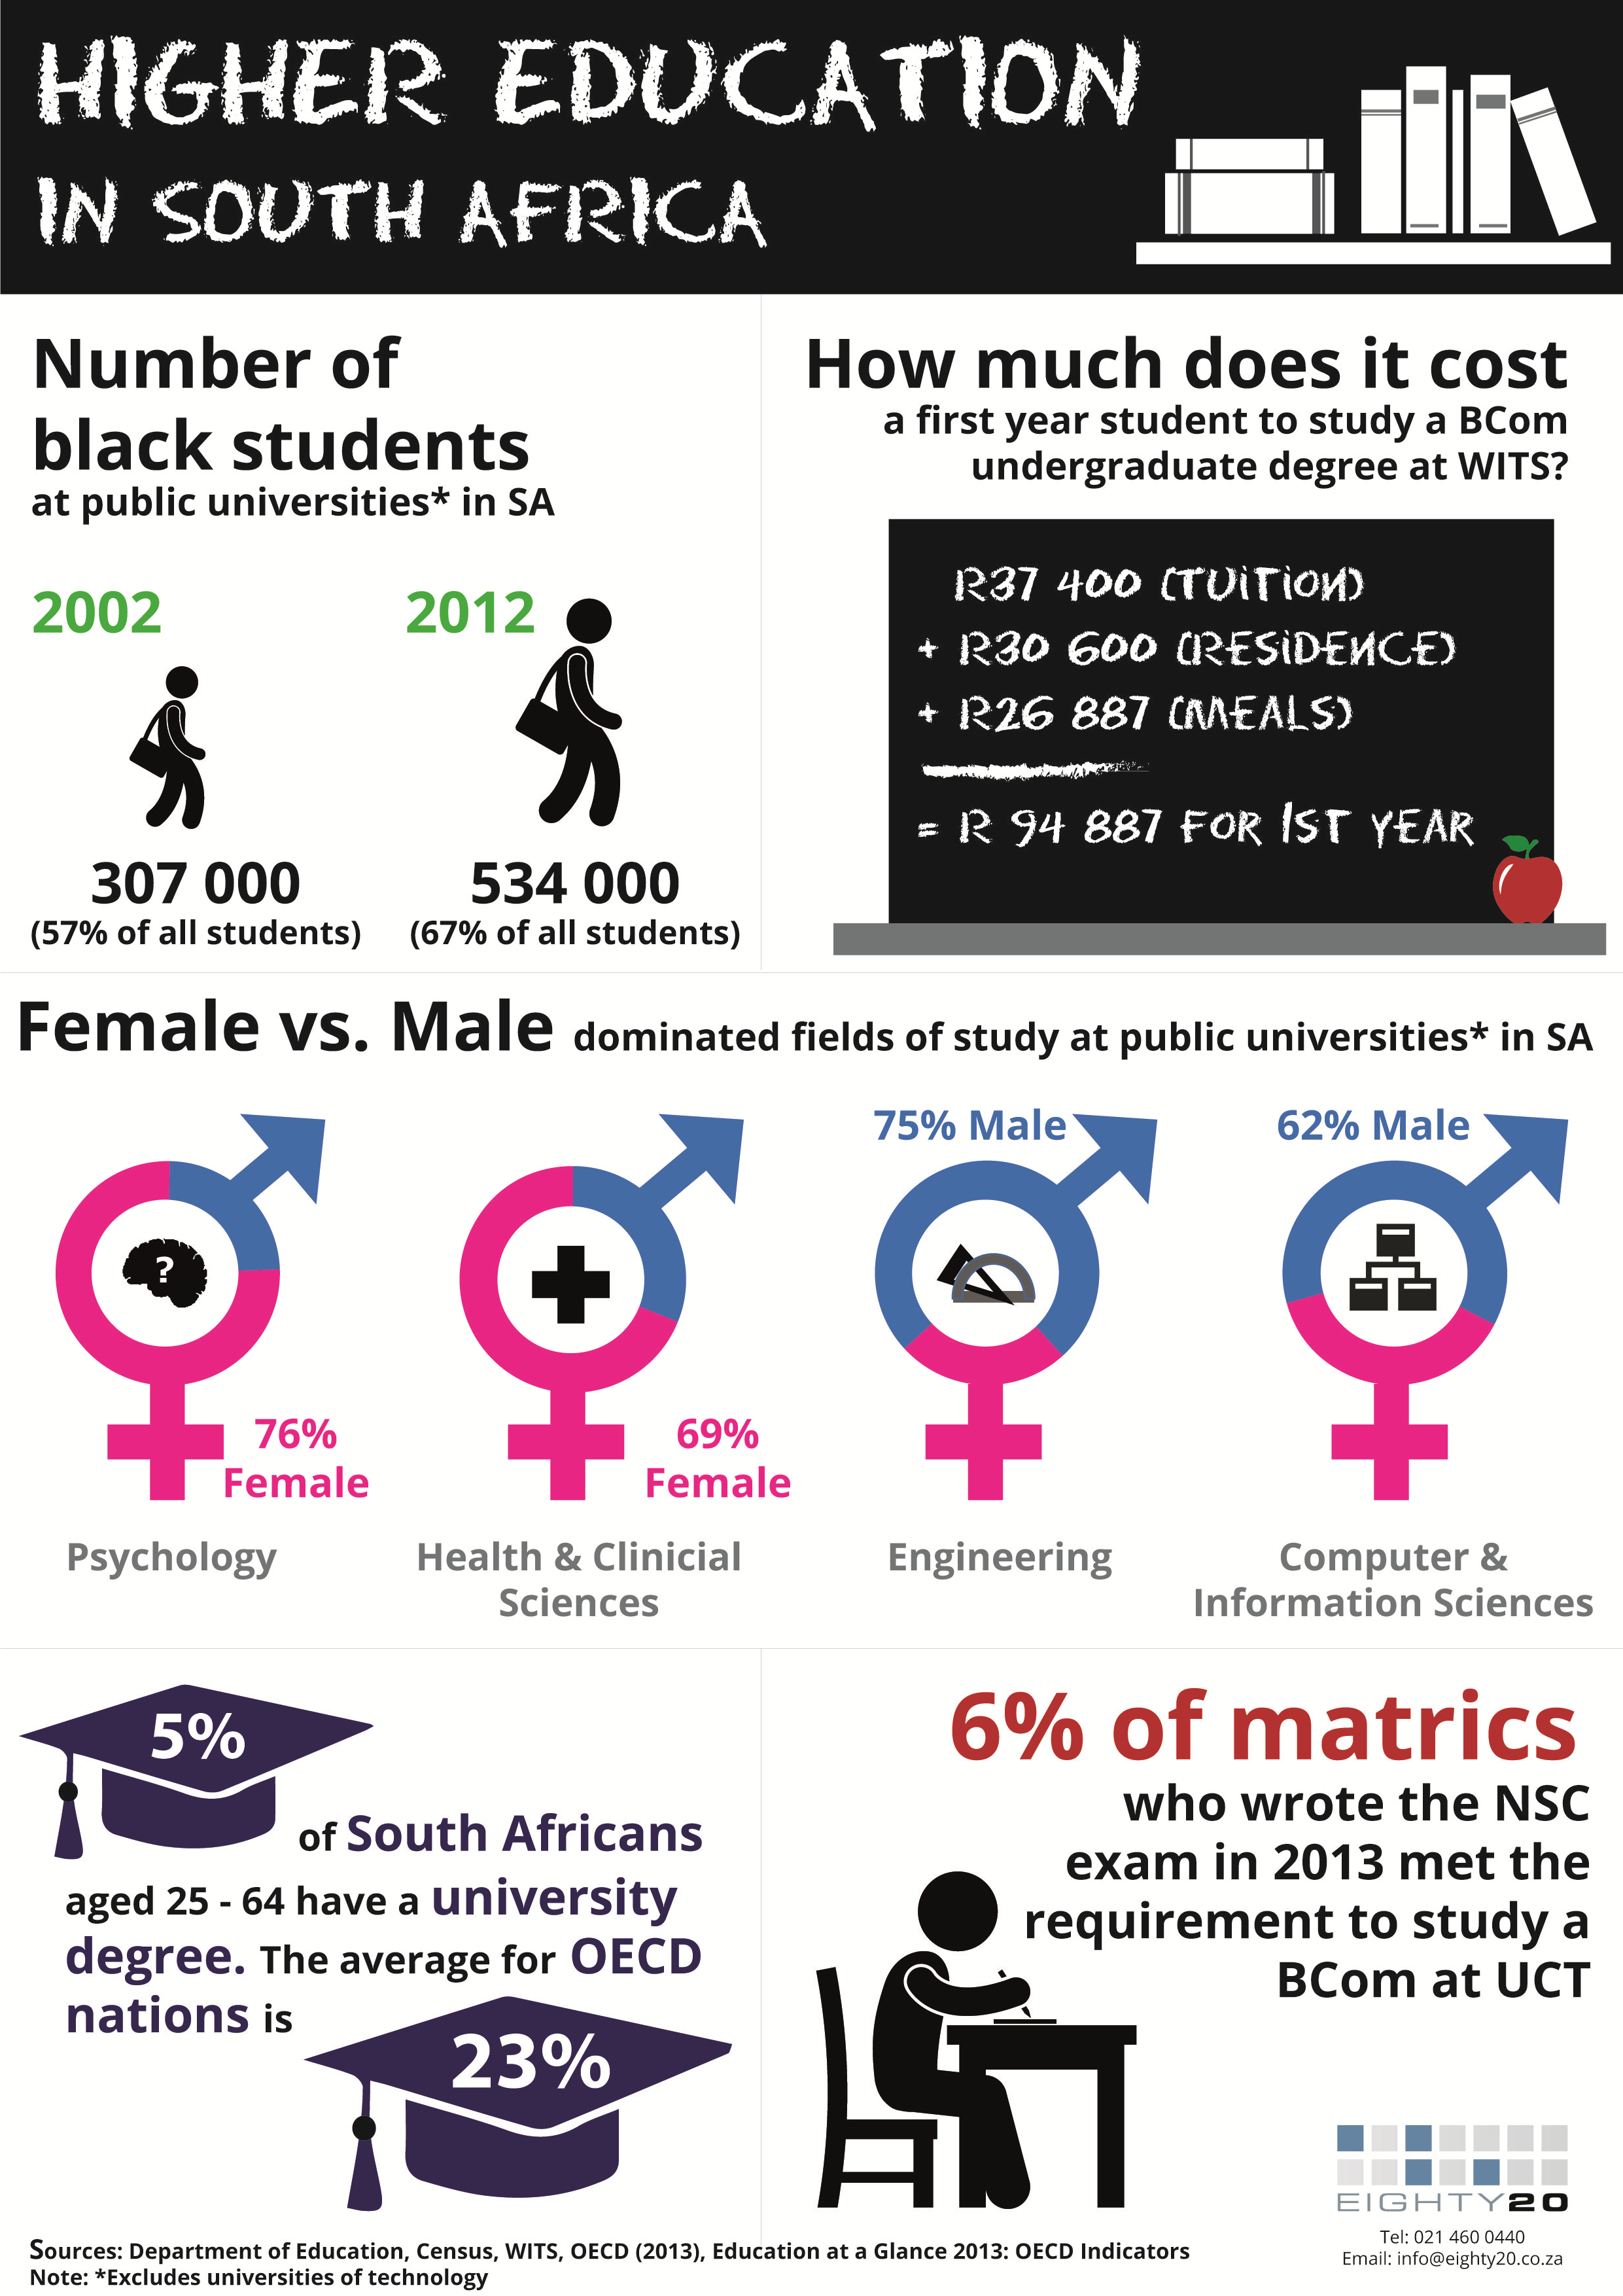 Eighty20_Education in South Africa